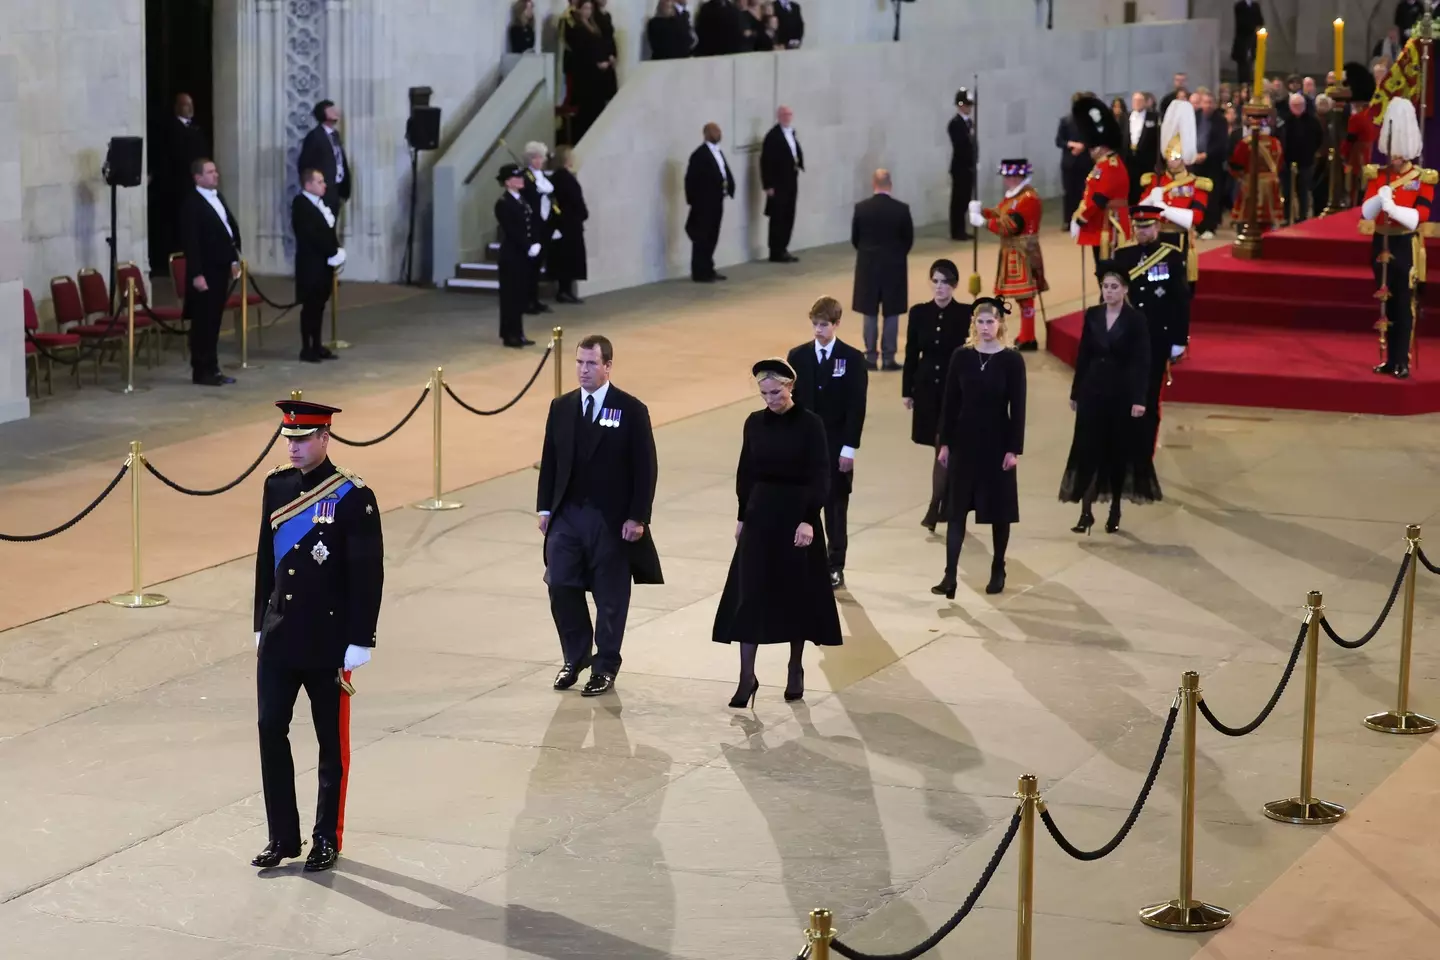 The princes stood shoulder to shoulder in Westminster Hall to hold a vigil by the Queen's coffin.